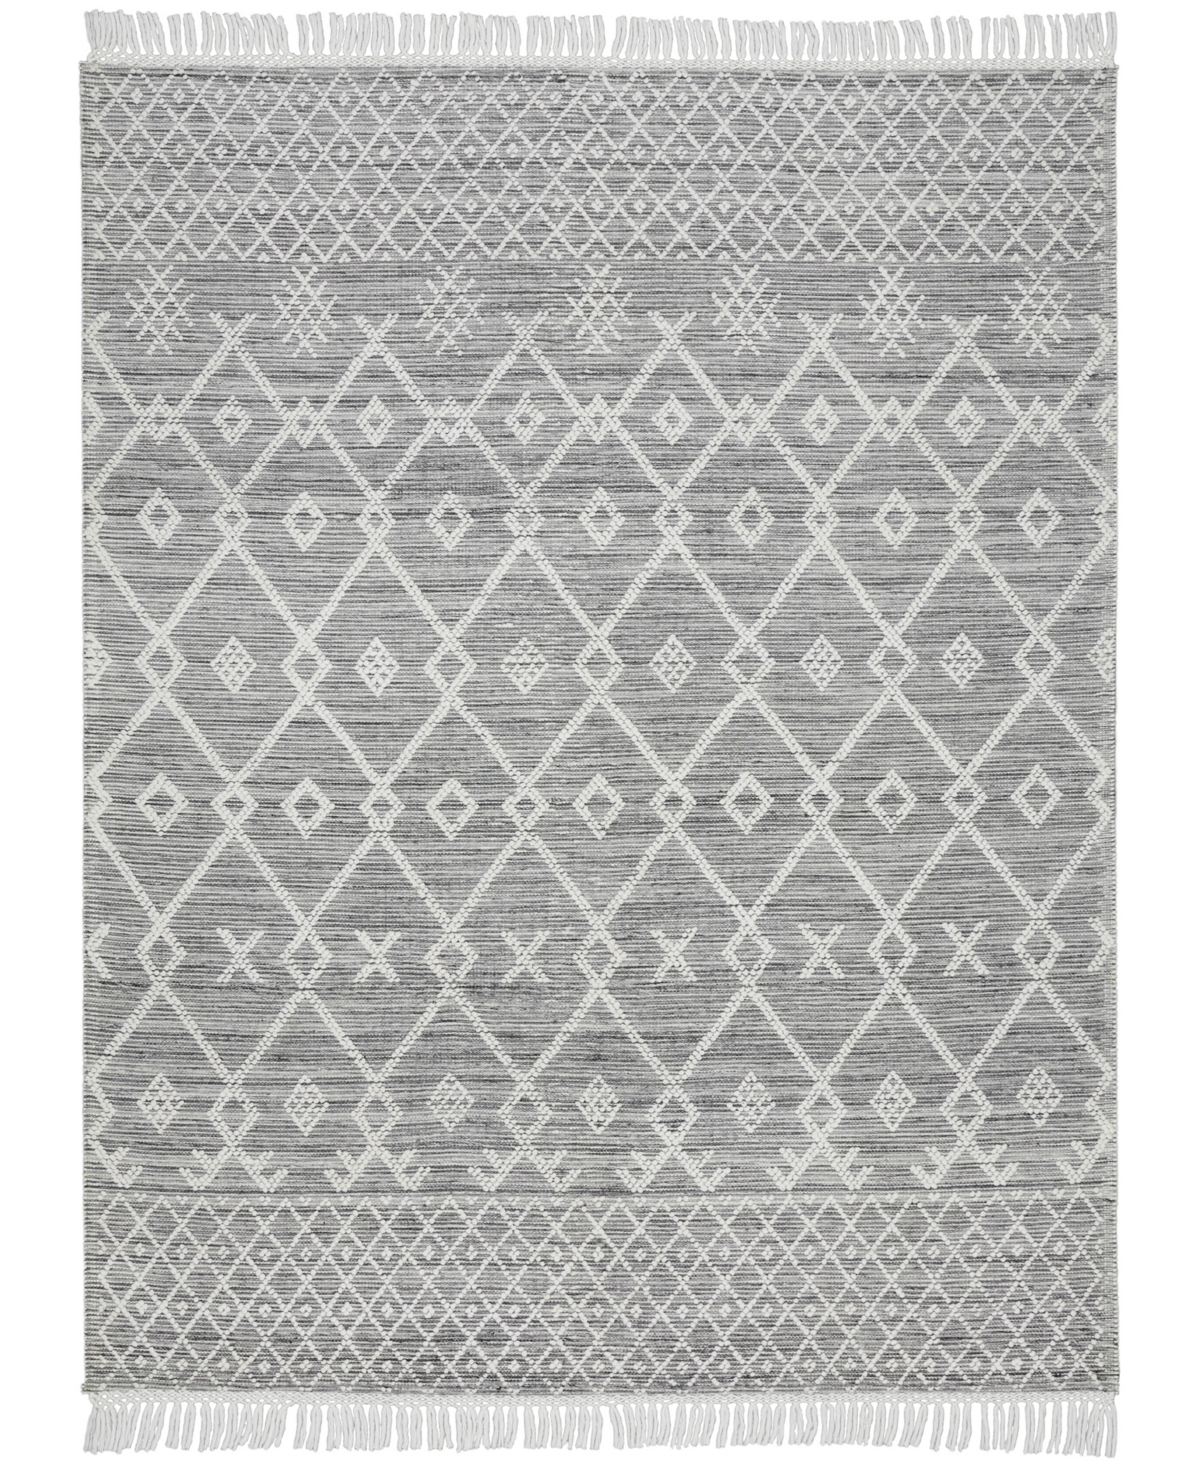 Nicole Curtis Series 3 Sr302 8' X 10'6" Area Rug In Gray,ivory